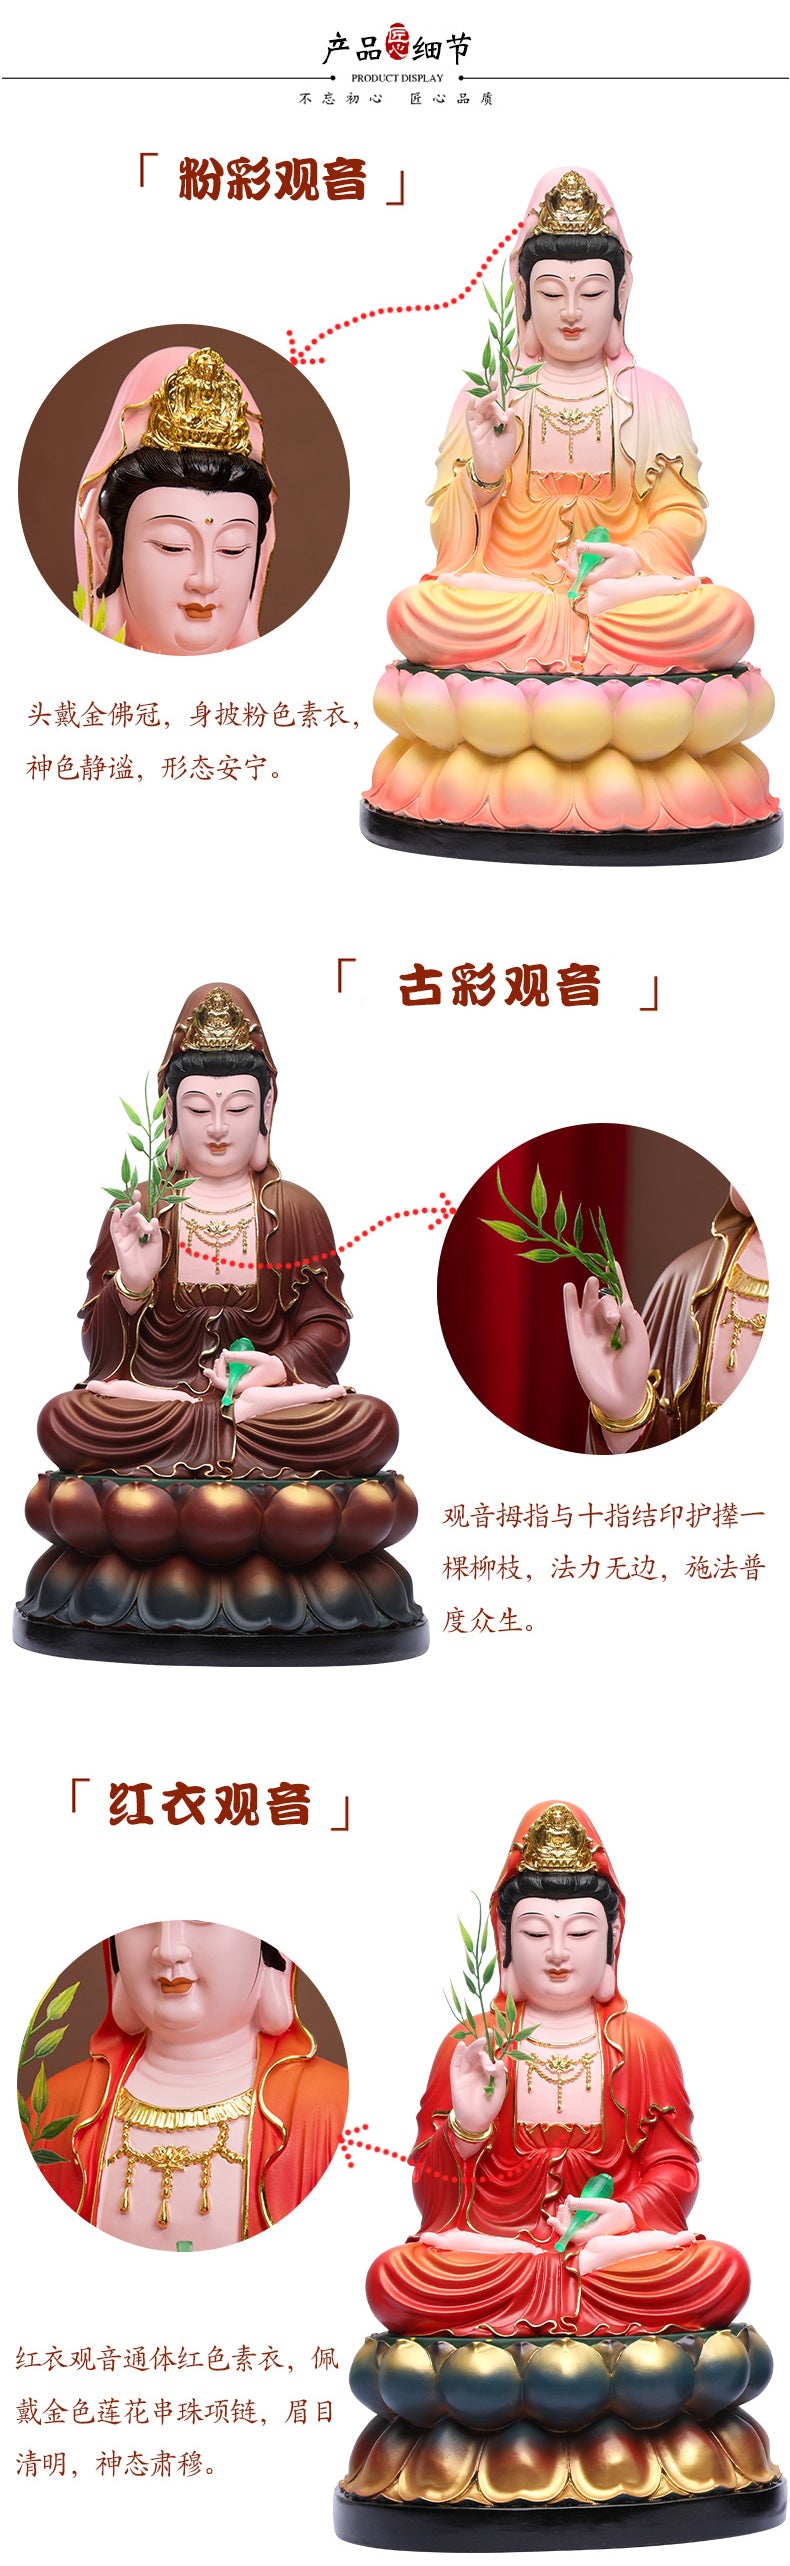 Guan Yin Bodhisattva Buddha Statue for Sale, Hand Holding Jade Bottle and Willow Leaves Kuan Yin Goddess, Pink Resin Material, Offerings Detail 1